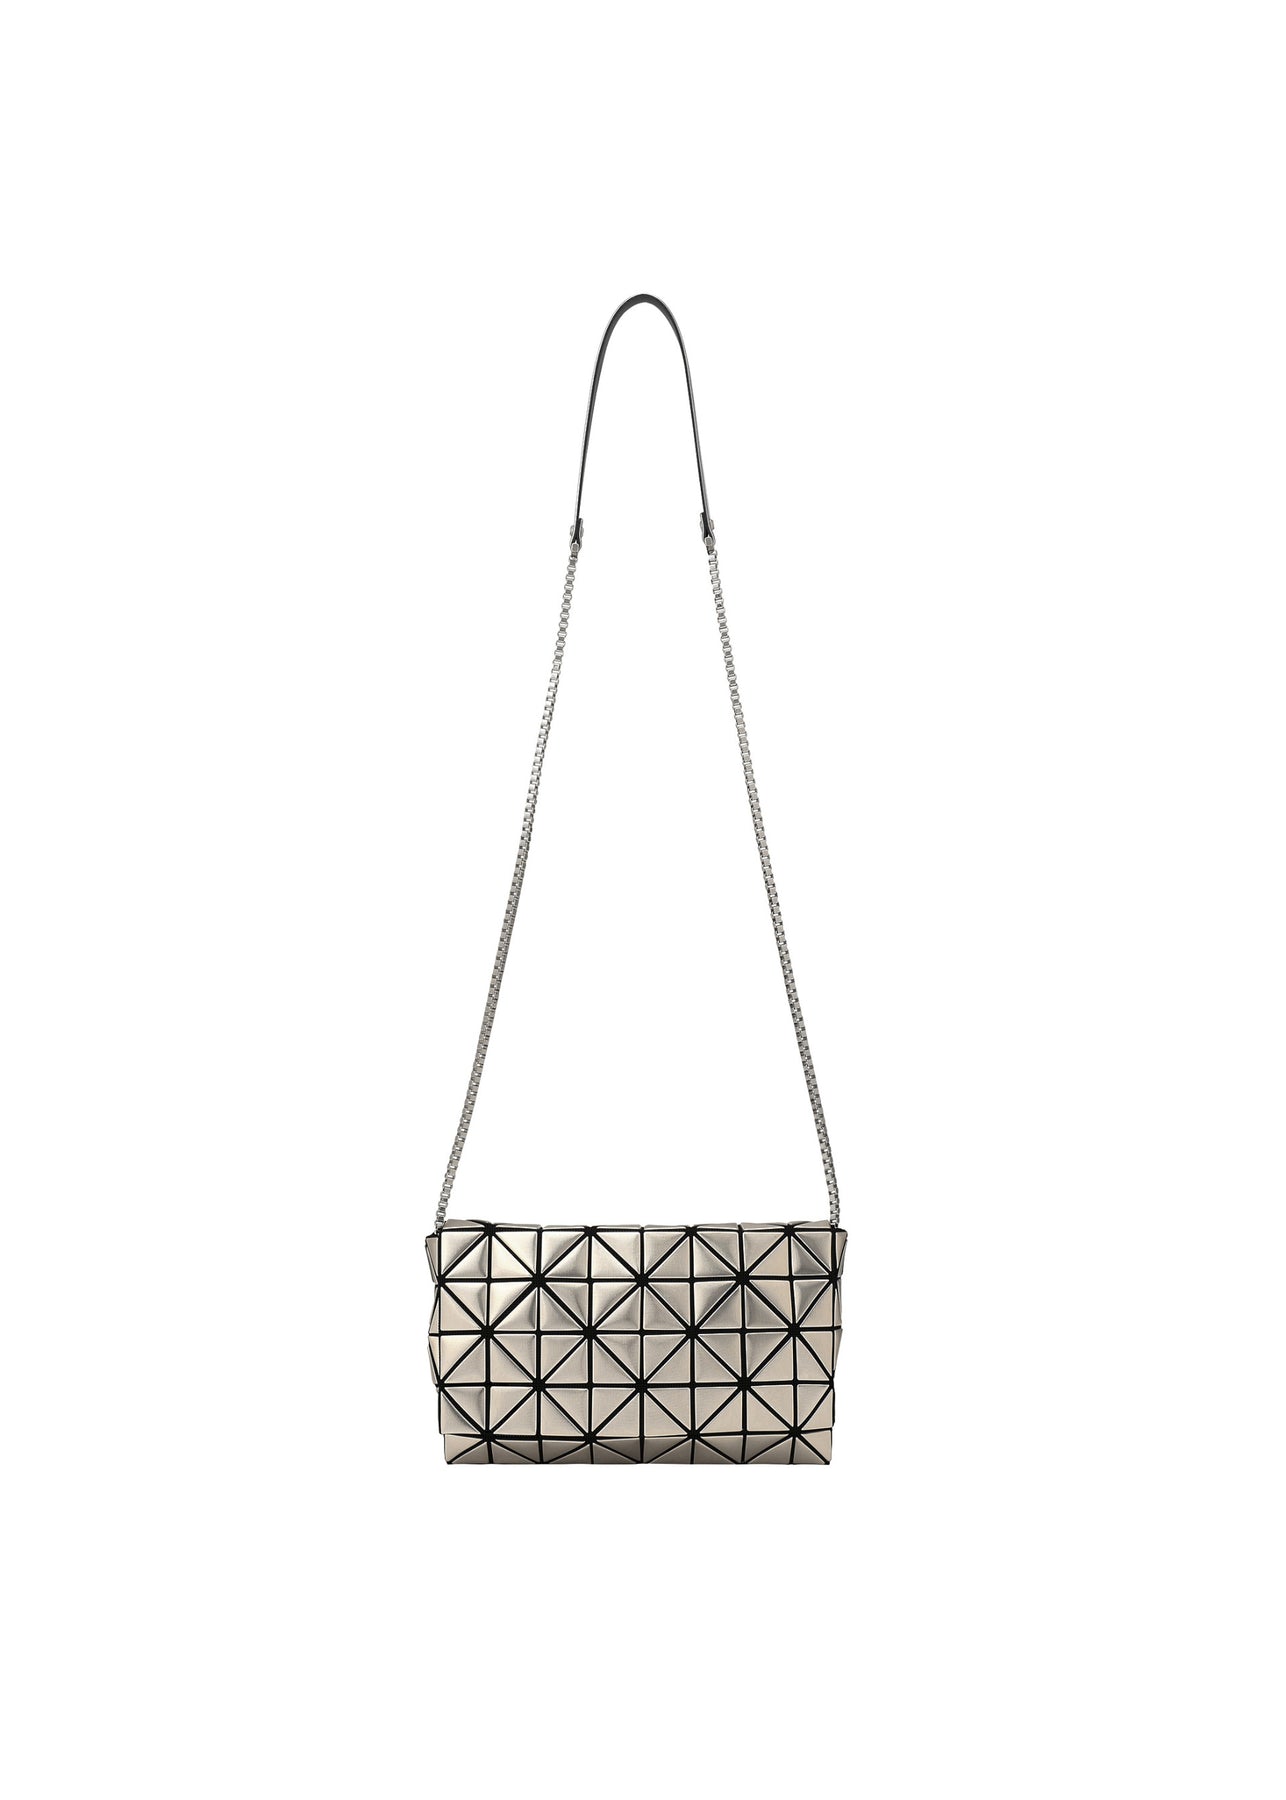 PLATINUM COFFRET CROSSBODY BAG | The official ISSEY MIYAKE ONLINE 